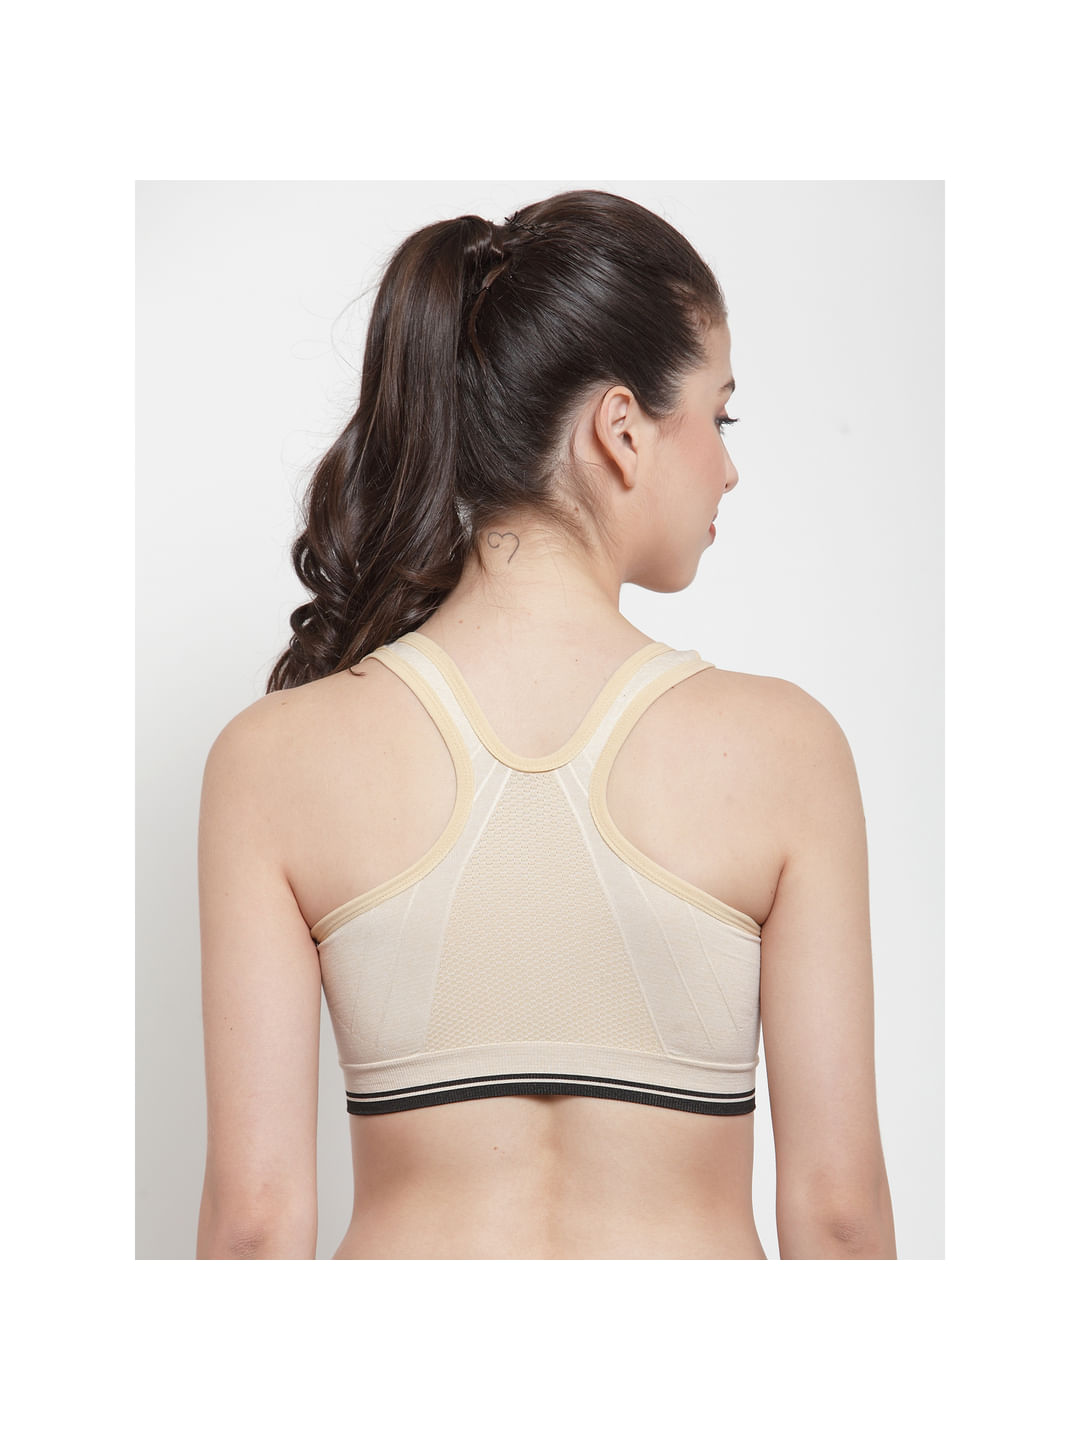 WITHWE Bras for Women Comfortable Front Zippered Bra, Steel Free